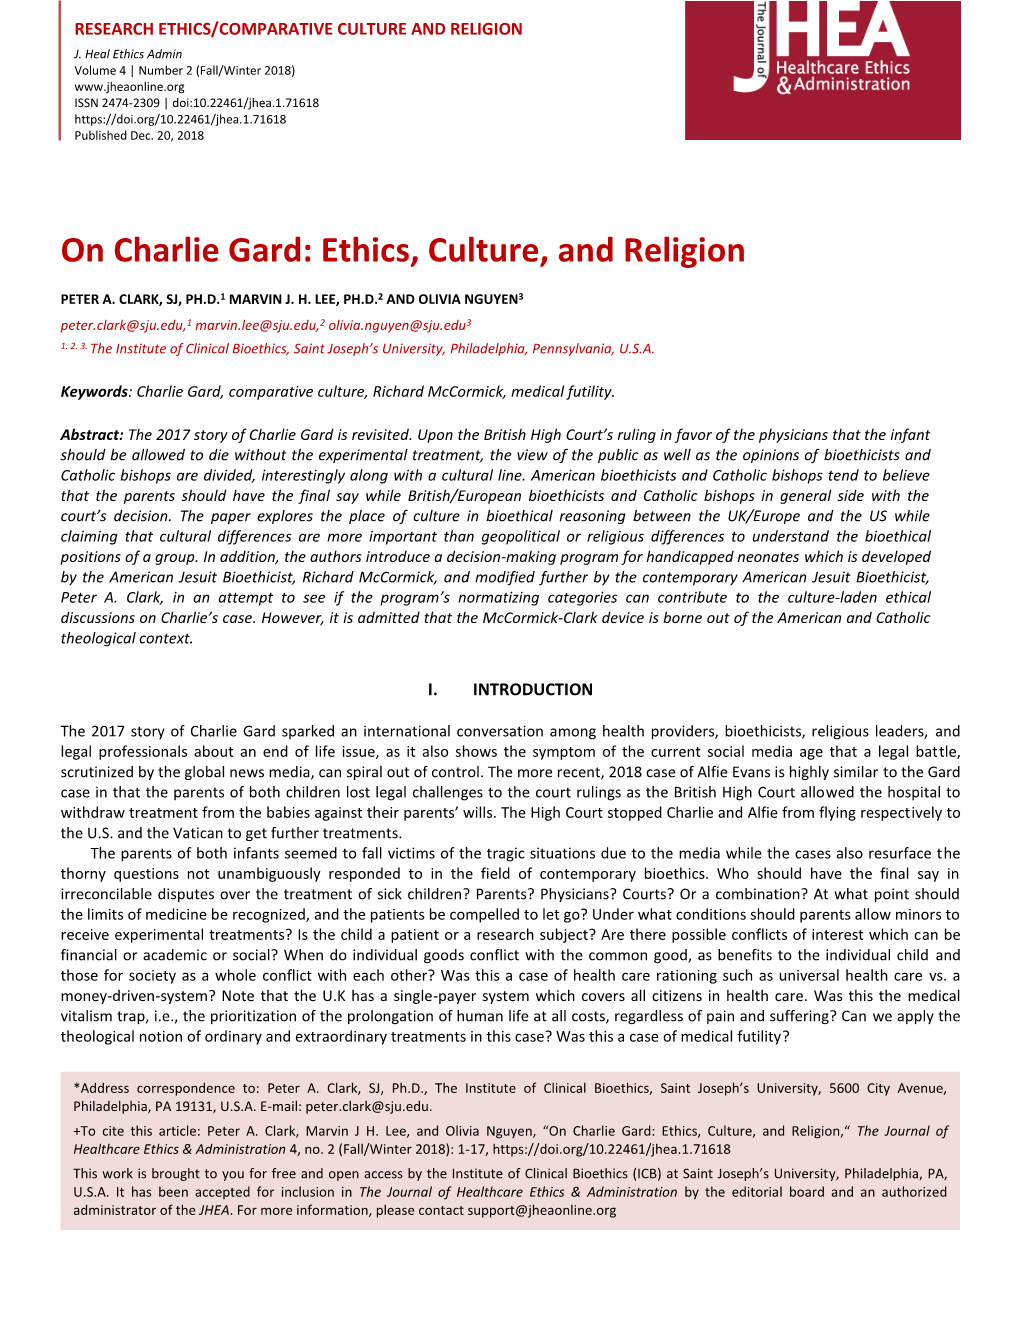 On Charlie Gard: Ethics, Culture, and Religion